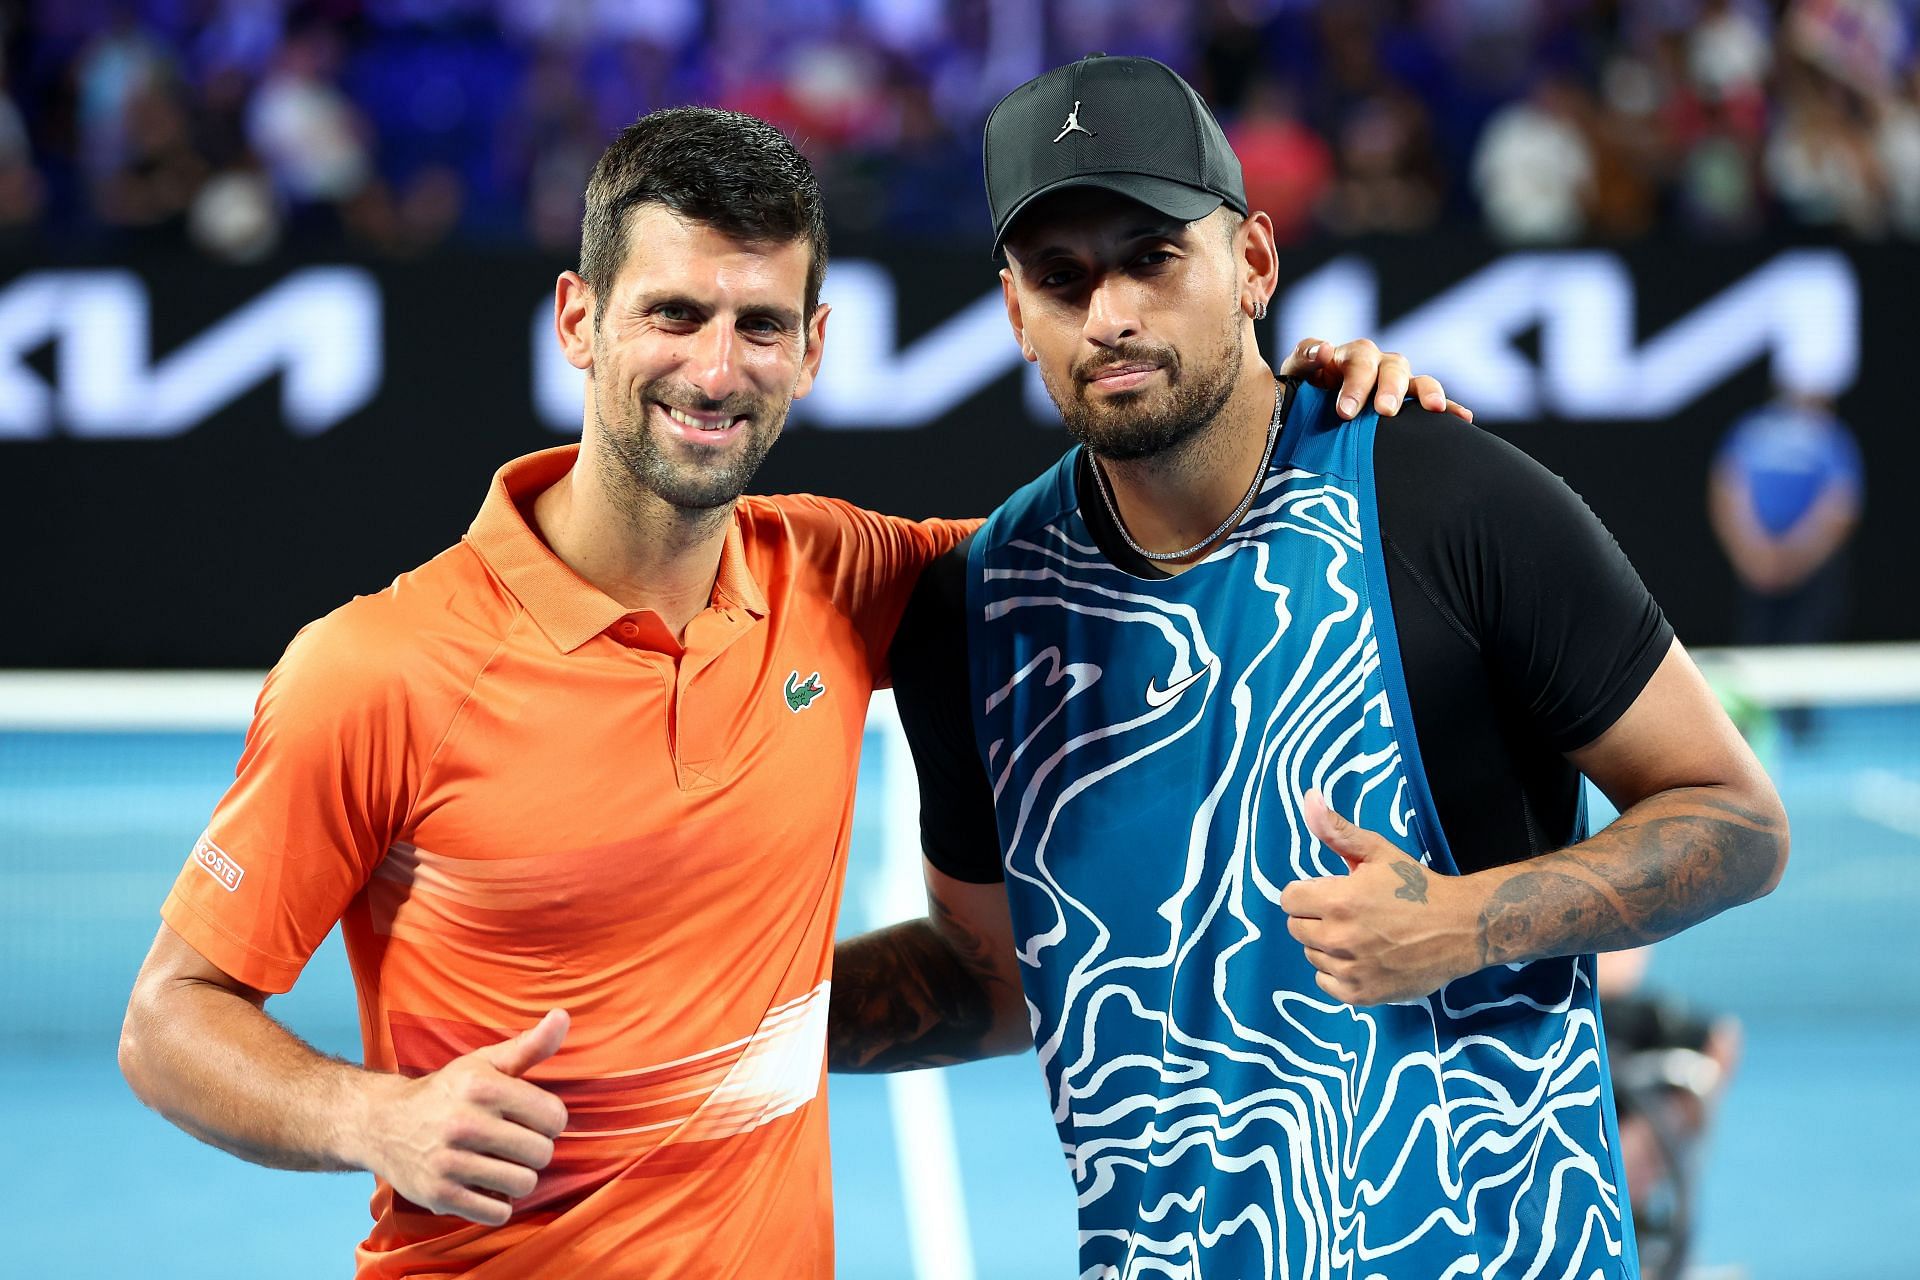 Novak Djokovic (L) and Nick Kyrgios (R) at the Arena Showdown charity match ahead of the 2023 Australian Open